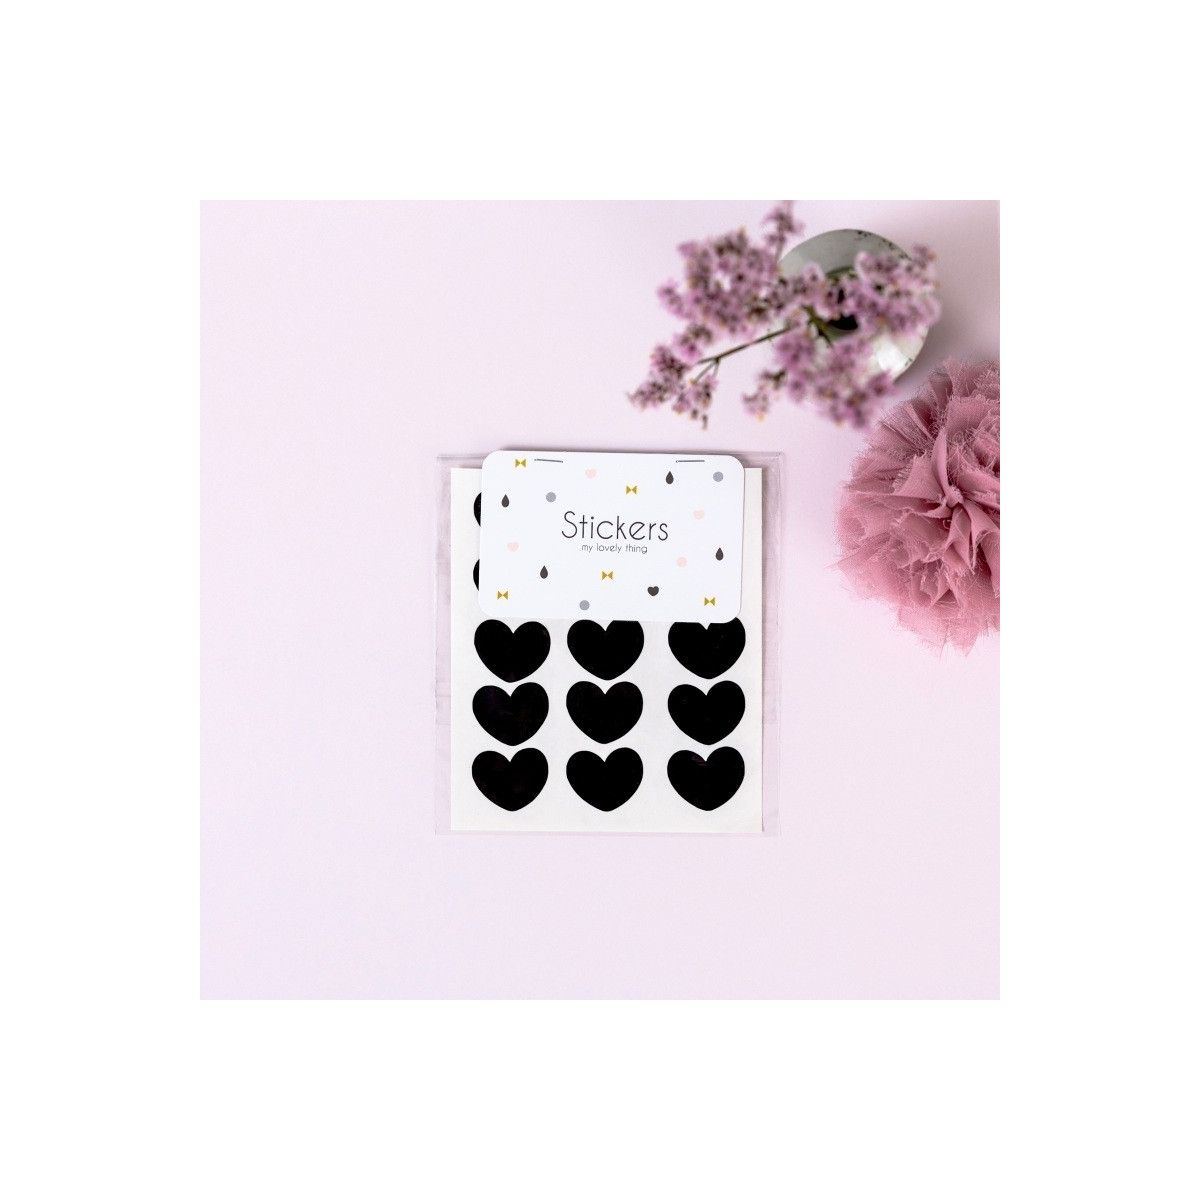 My Lovely Thing - Stickers Heart black - Papeles pintados